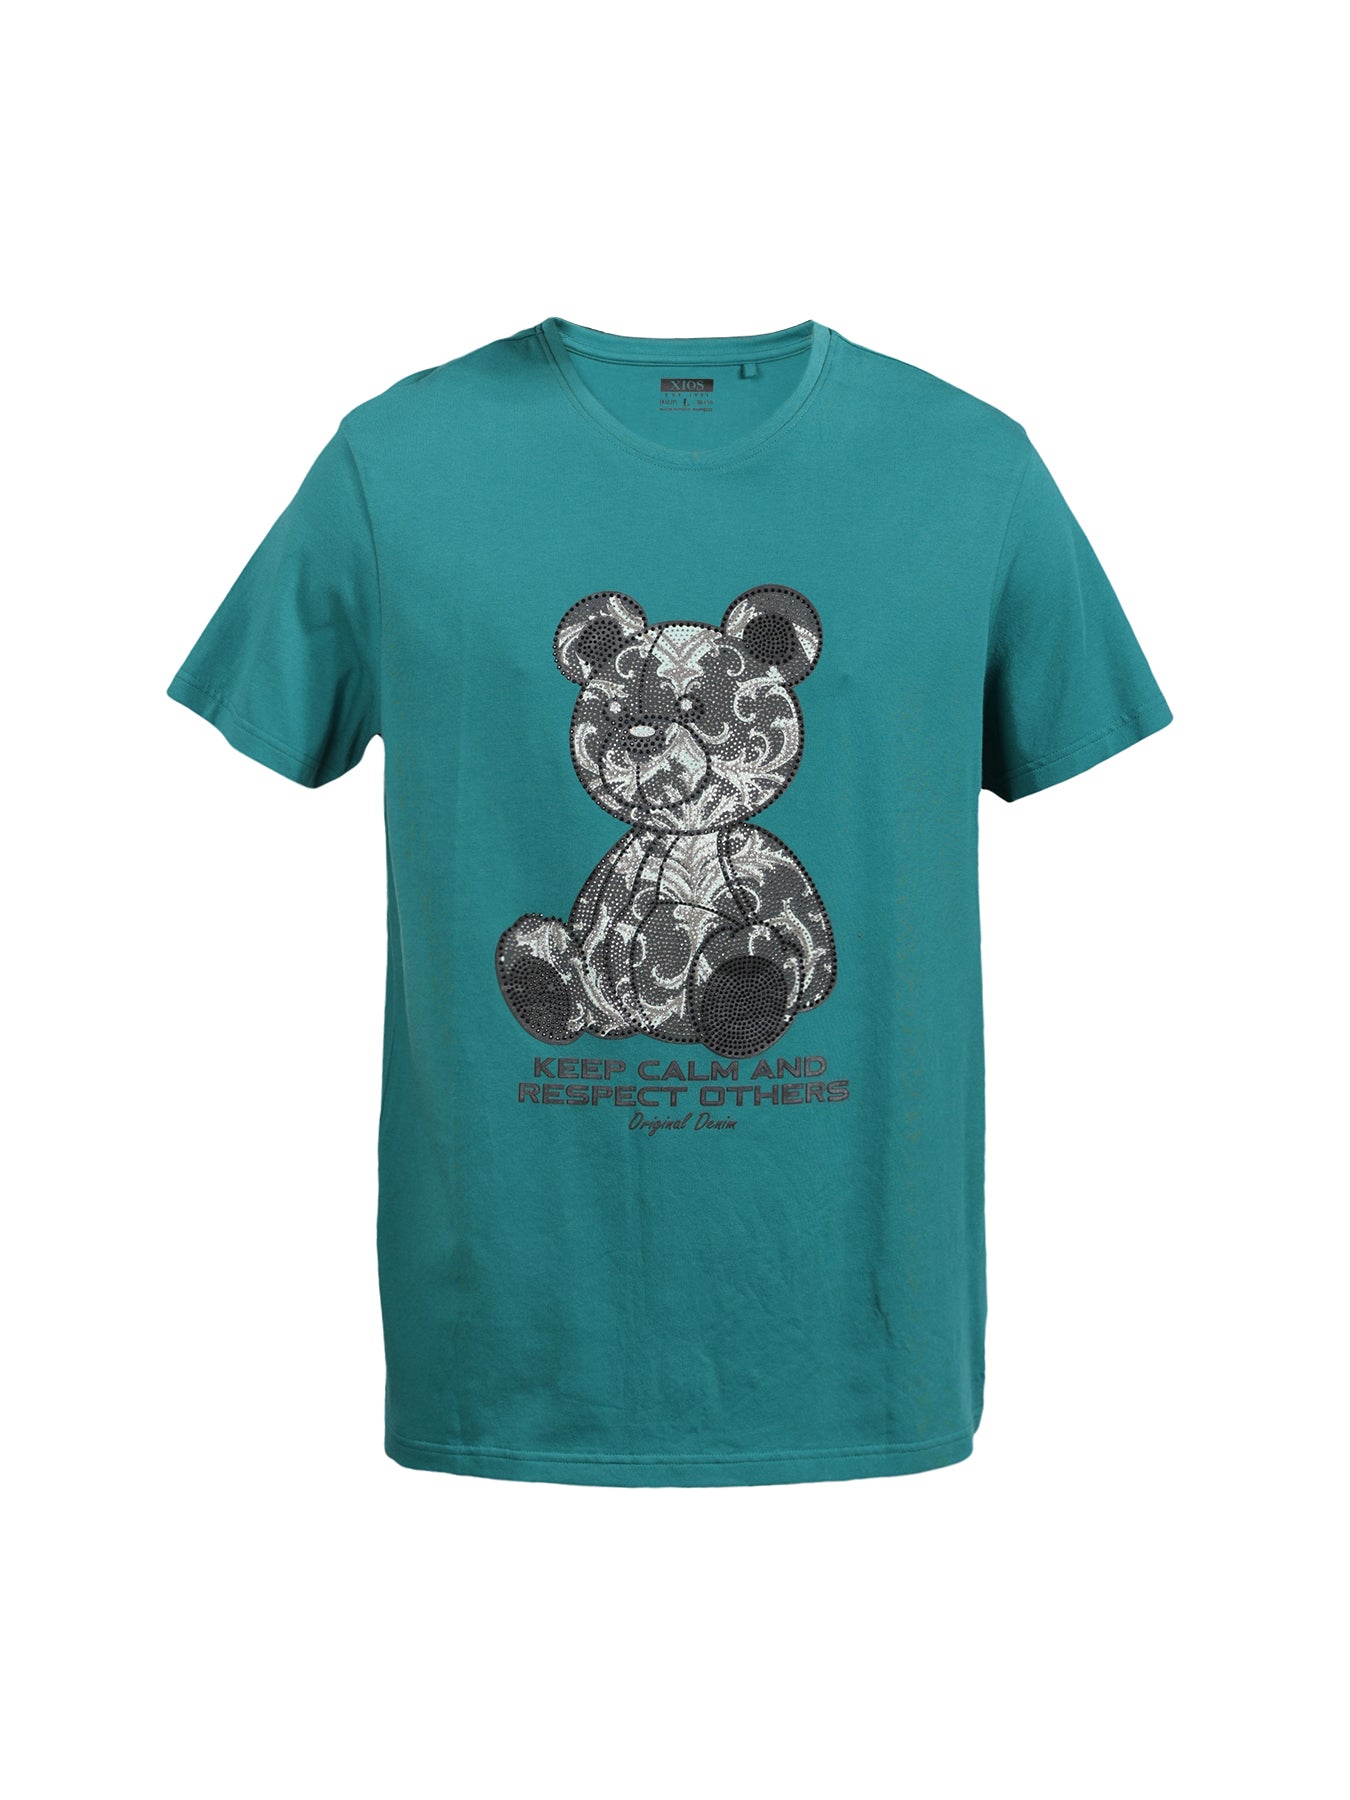 Keep Calm and Respect Others Teddy Bear Graphic Tee